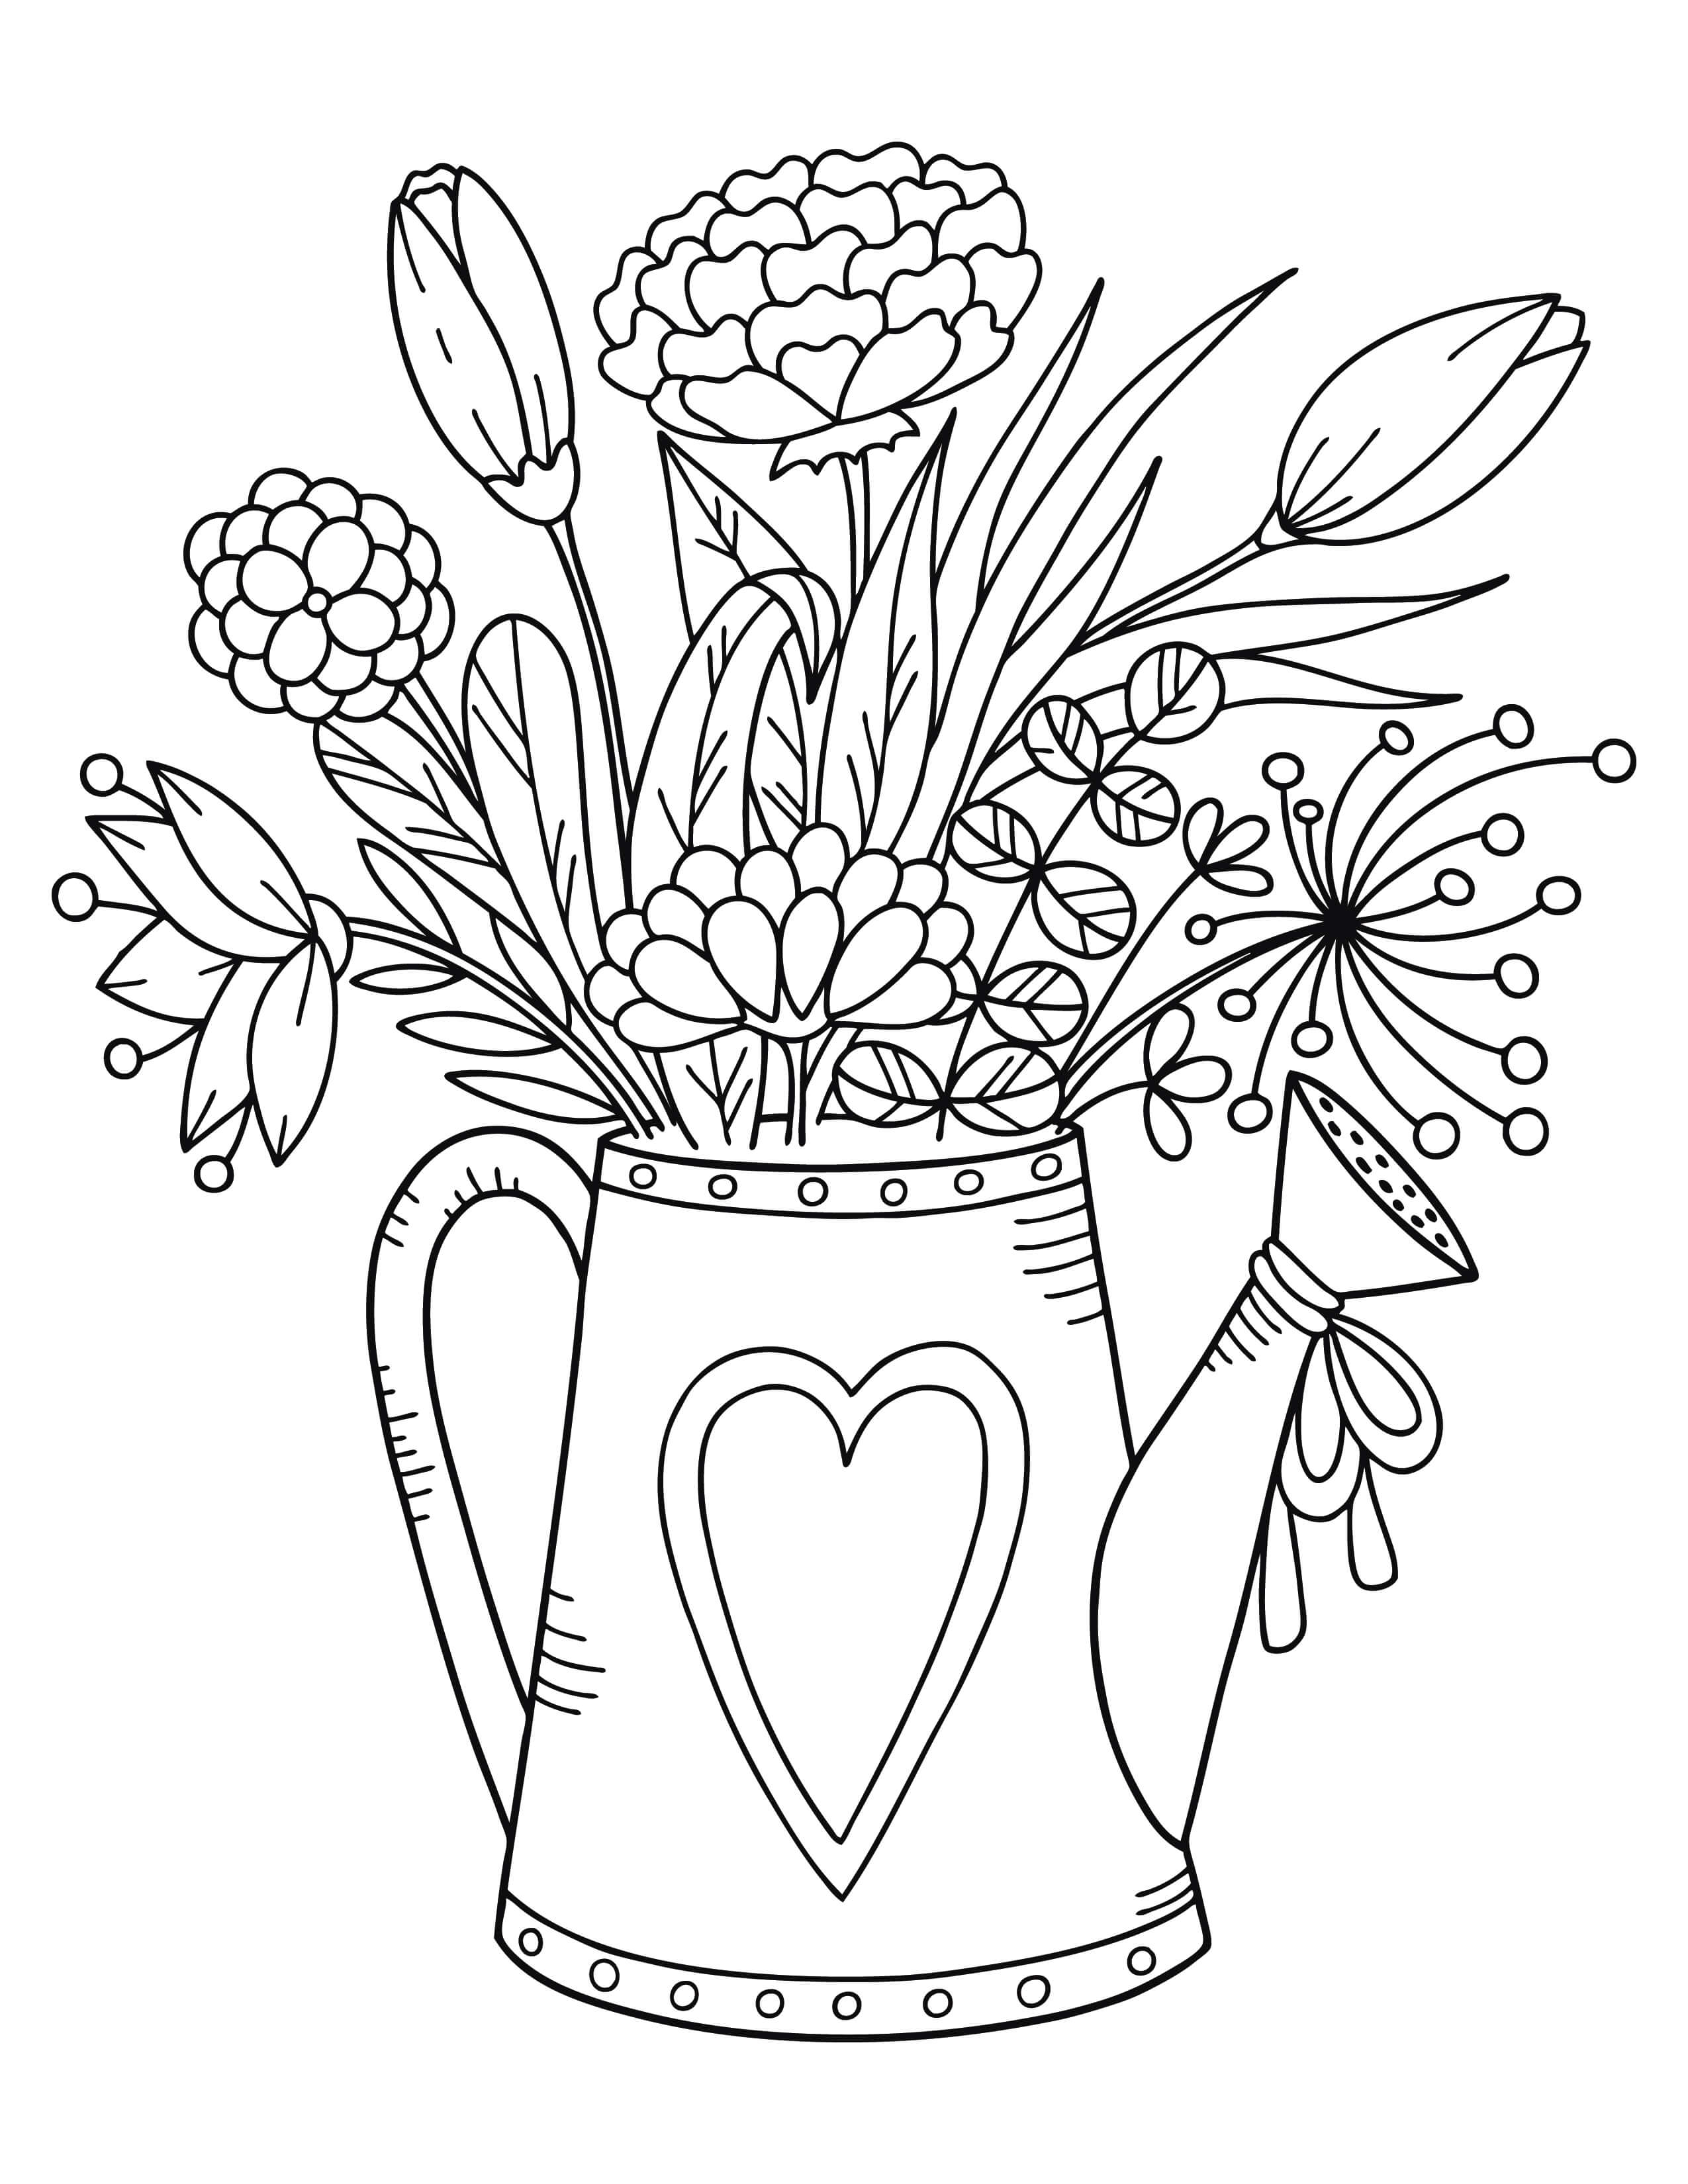 Flowers colouring in page